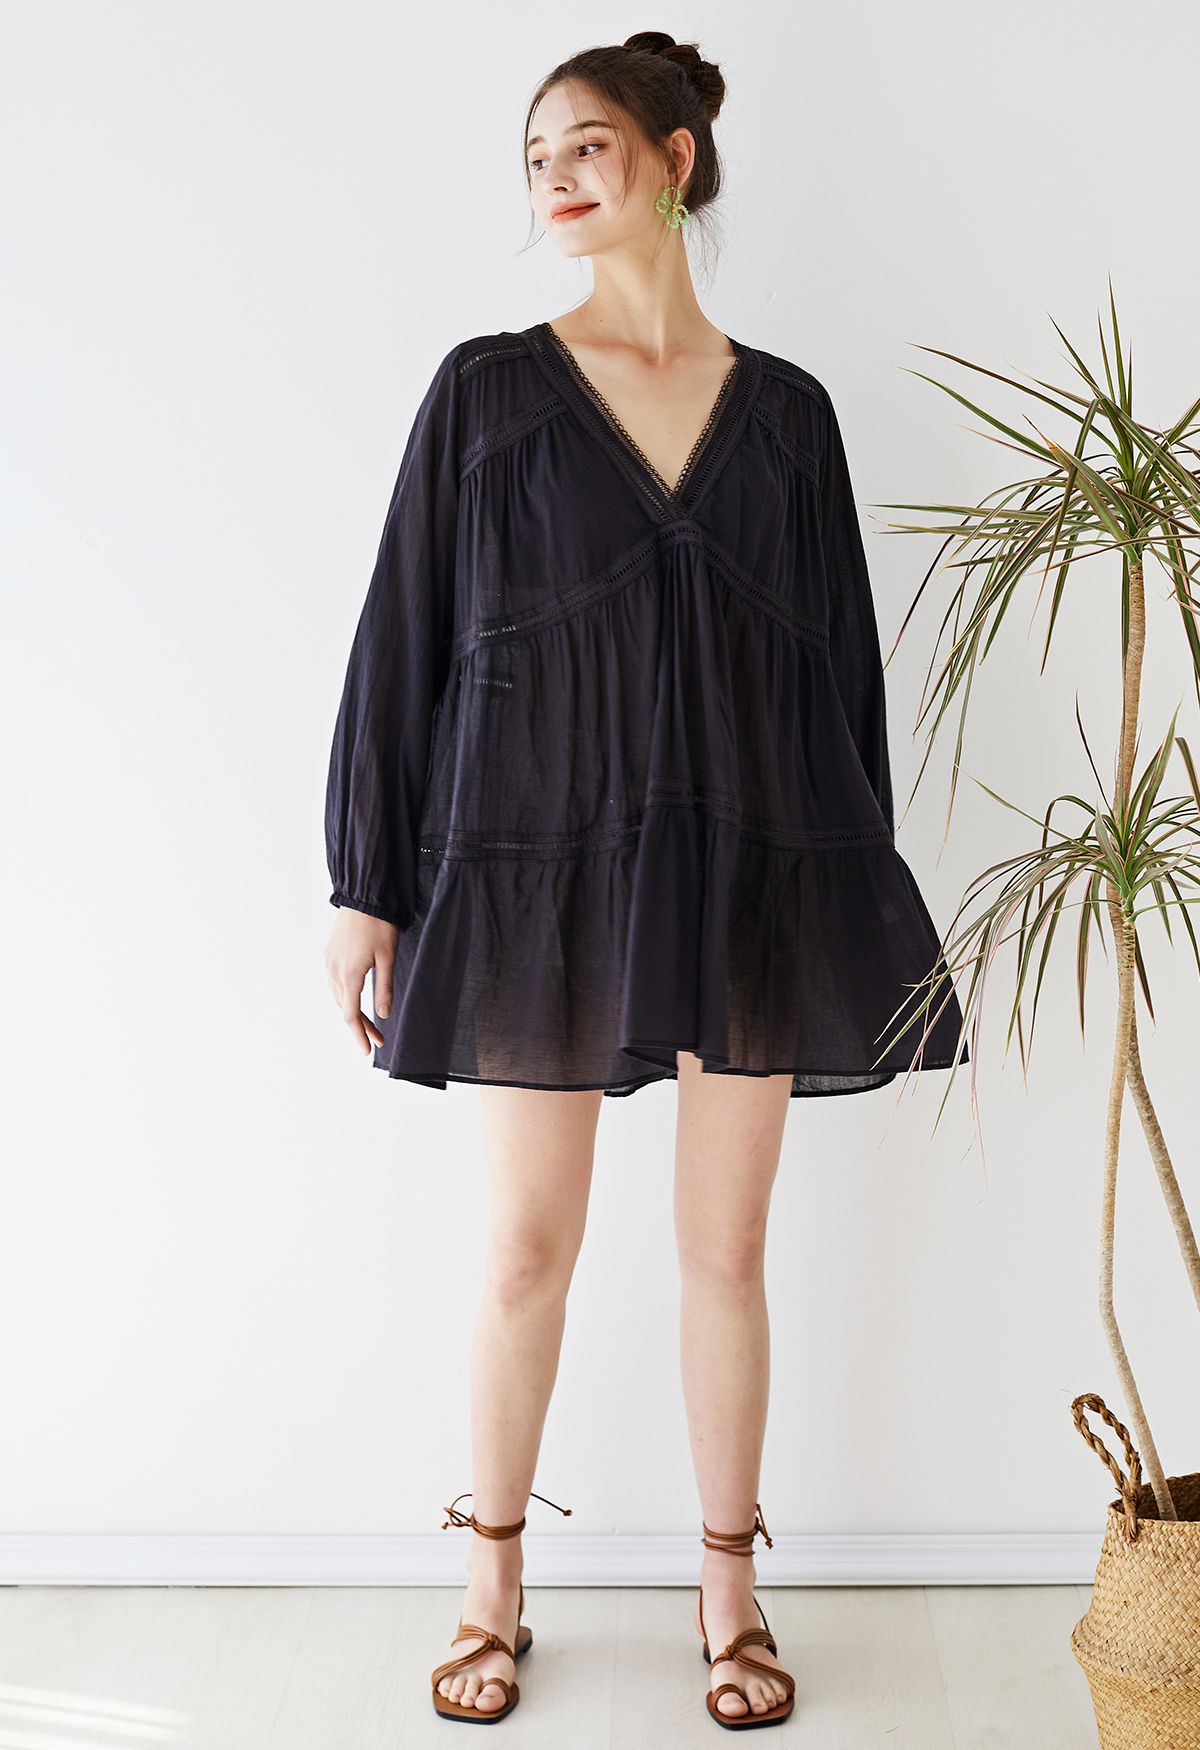 Lithe Plunging Cotton Tunic in Black - Retro, Indie and Unique Fashion